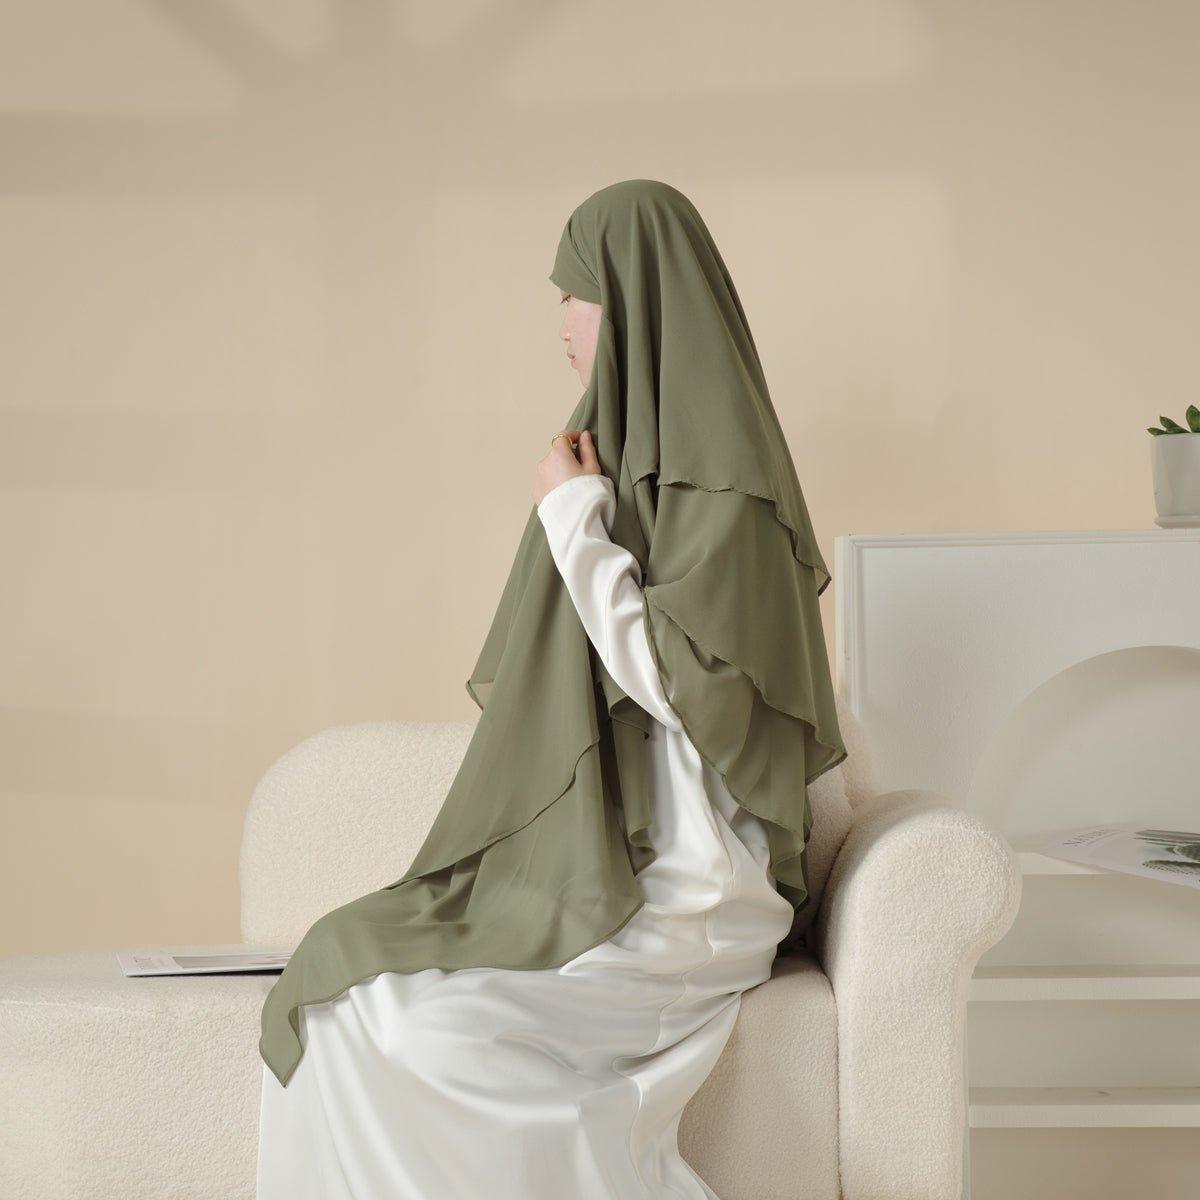 MK017 Scarf 3 - Layer Long Khimar - Mariam's Collection